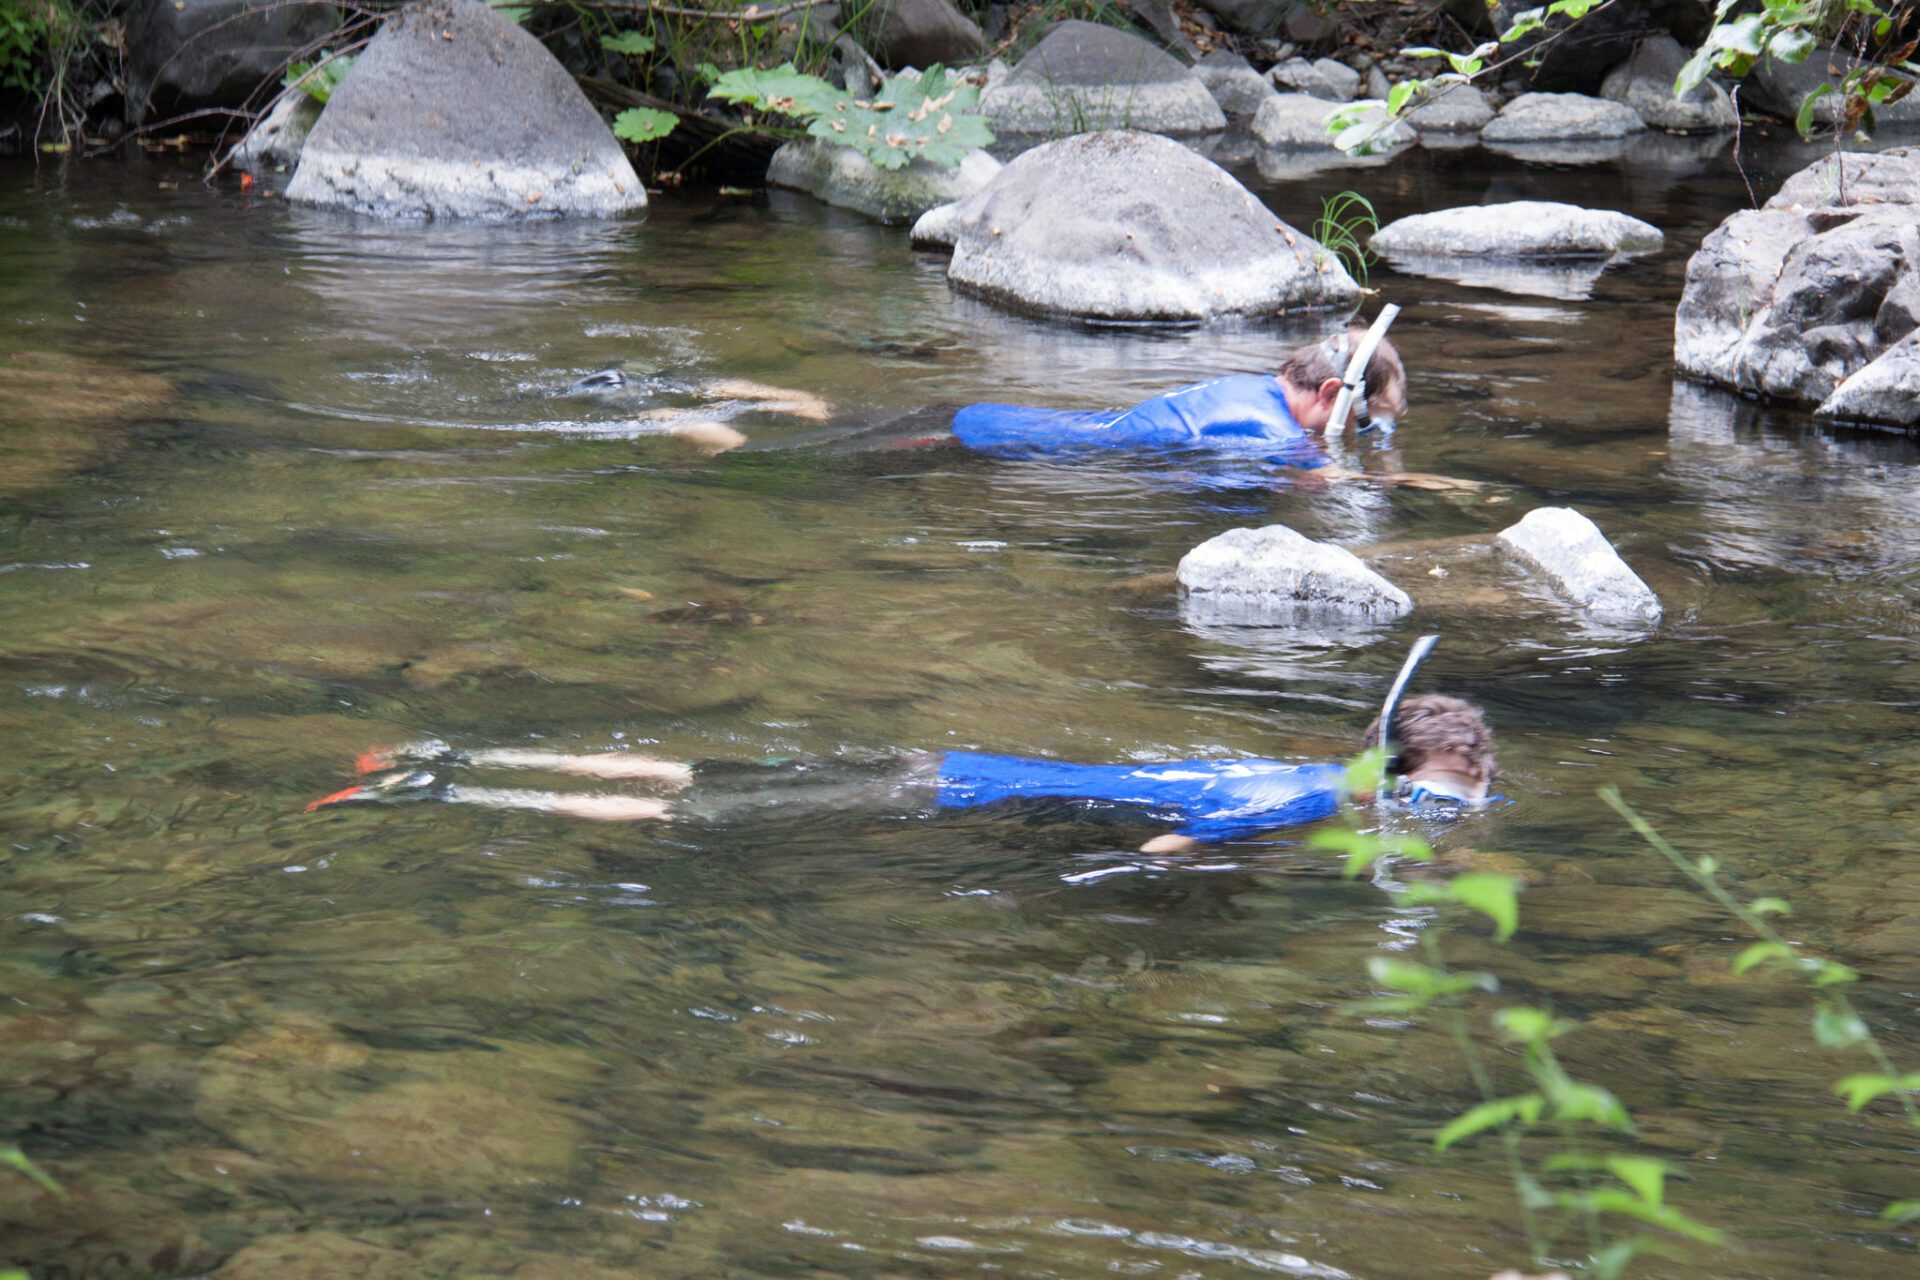 Snorkelers in sync on Big Chico Creek